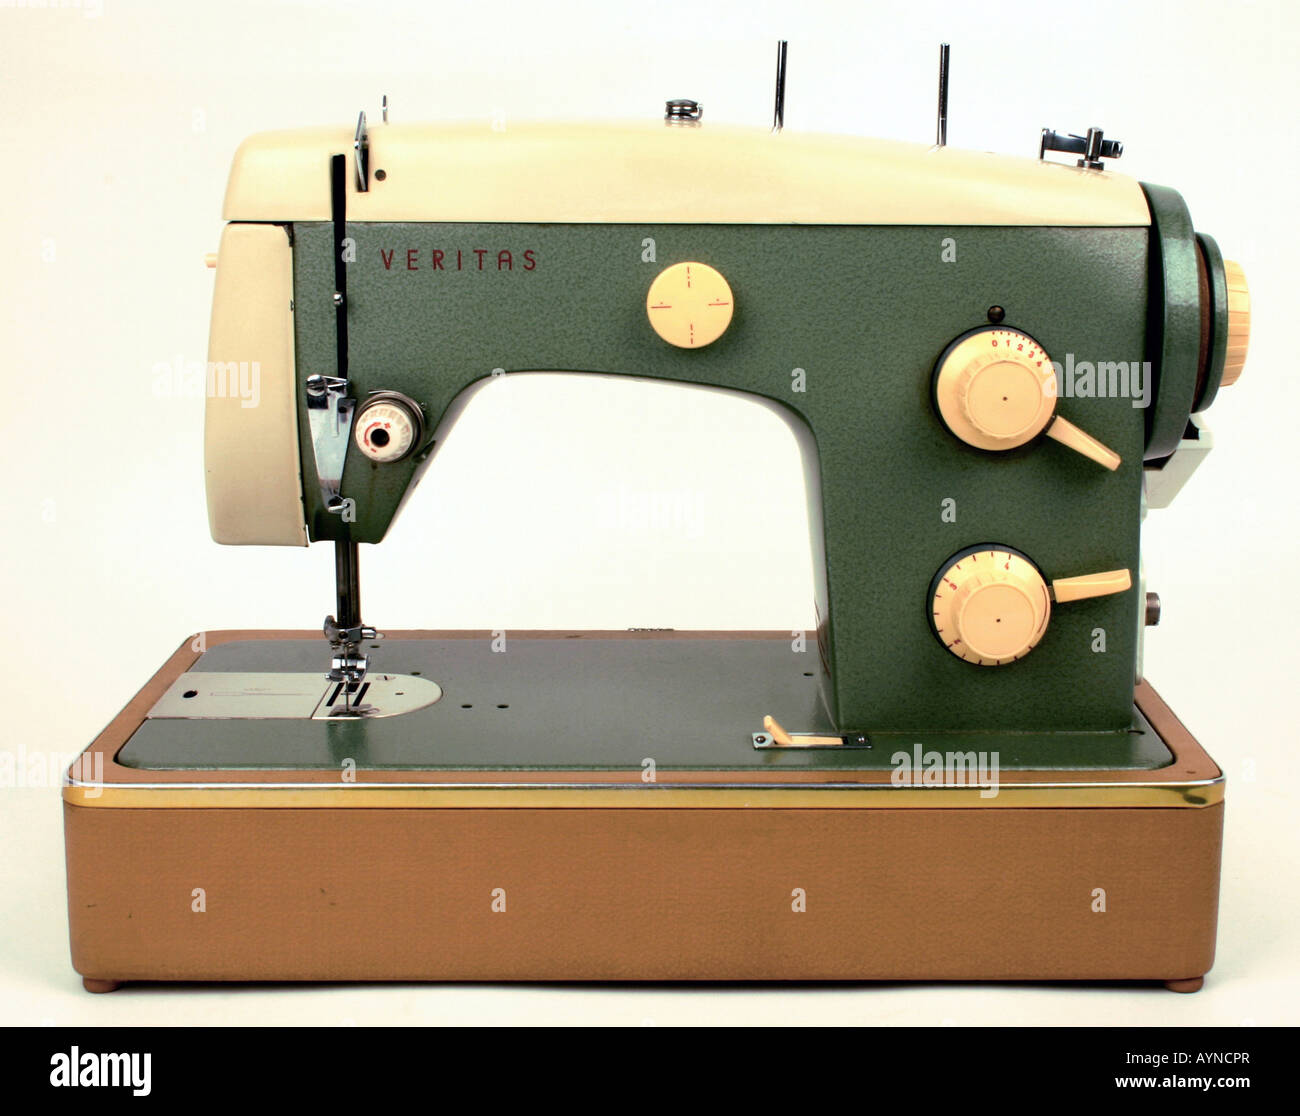 household, household appliances, electrical sewing machine Veritas 8014/22,  produced by VEB Textima Naehmaschinenwerk Wittenberge, GDR, 1960s Stock  Photo - Alamy